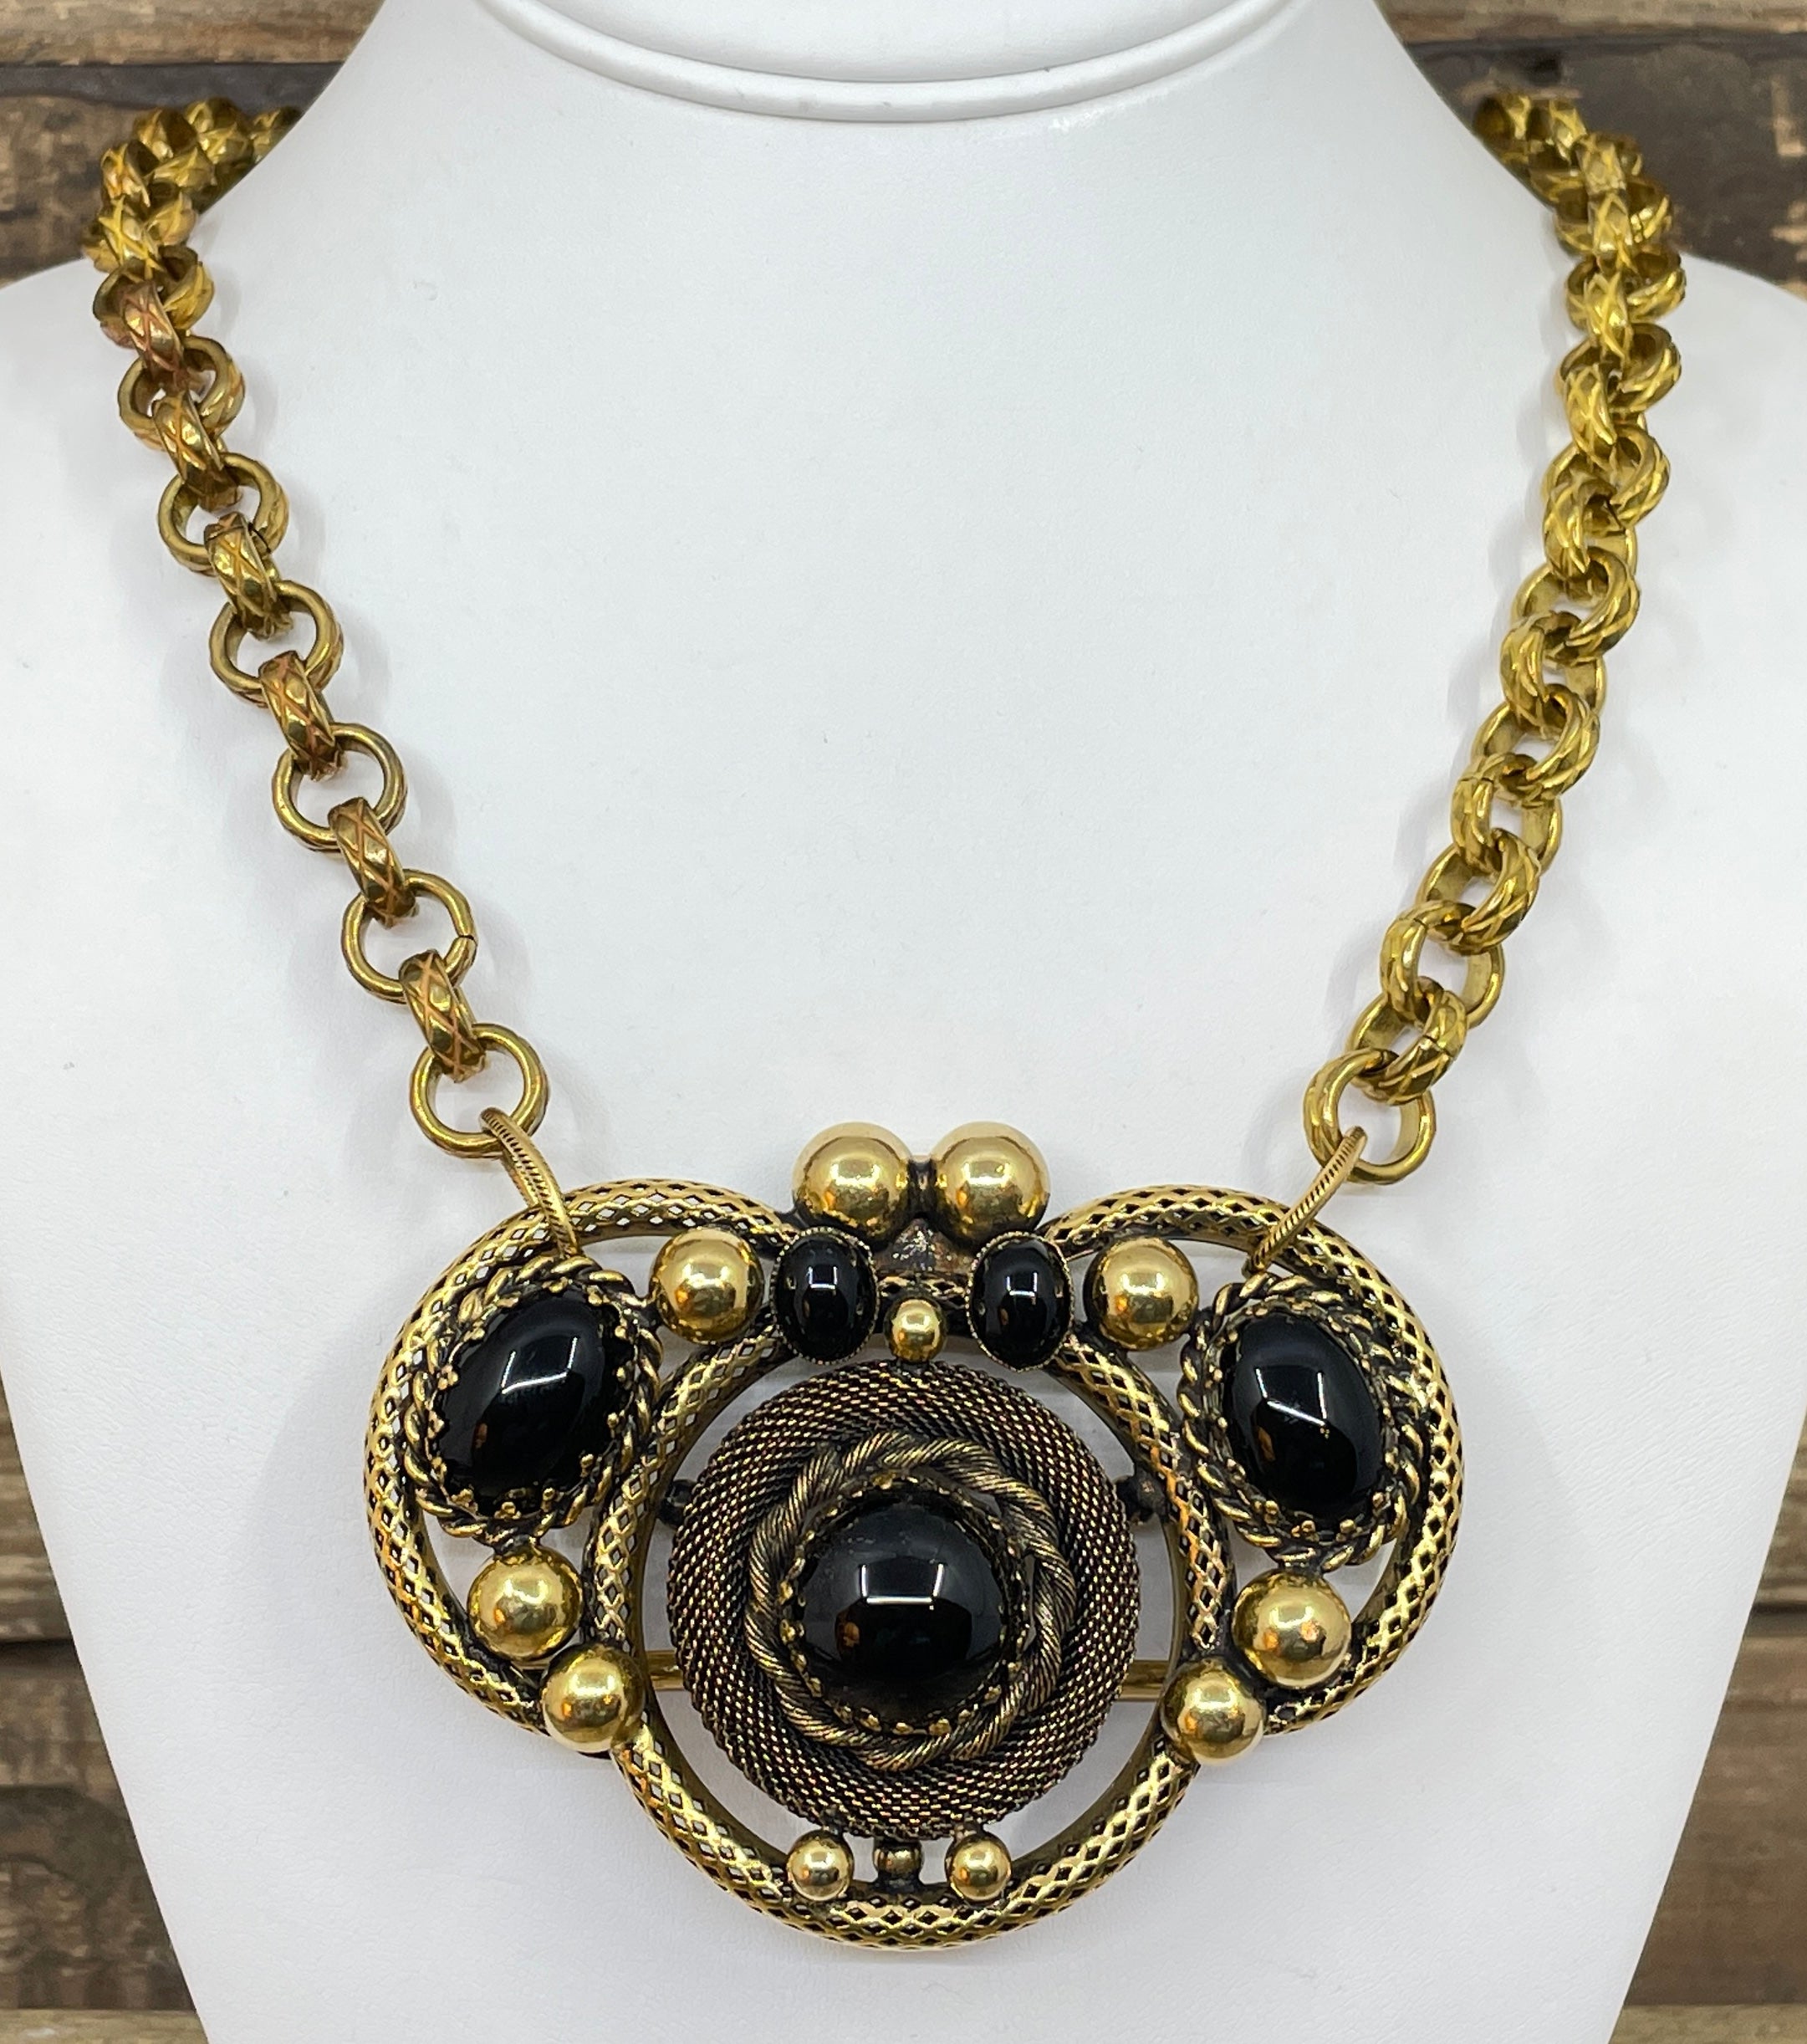 Vintage French Sash Buckle Necklace